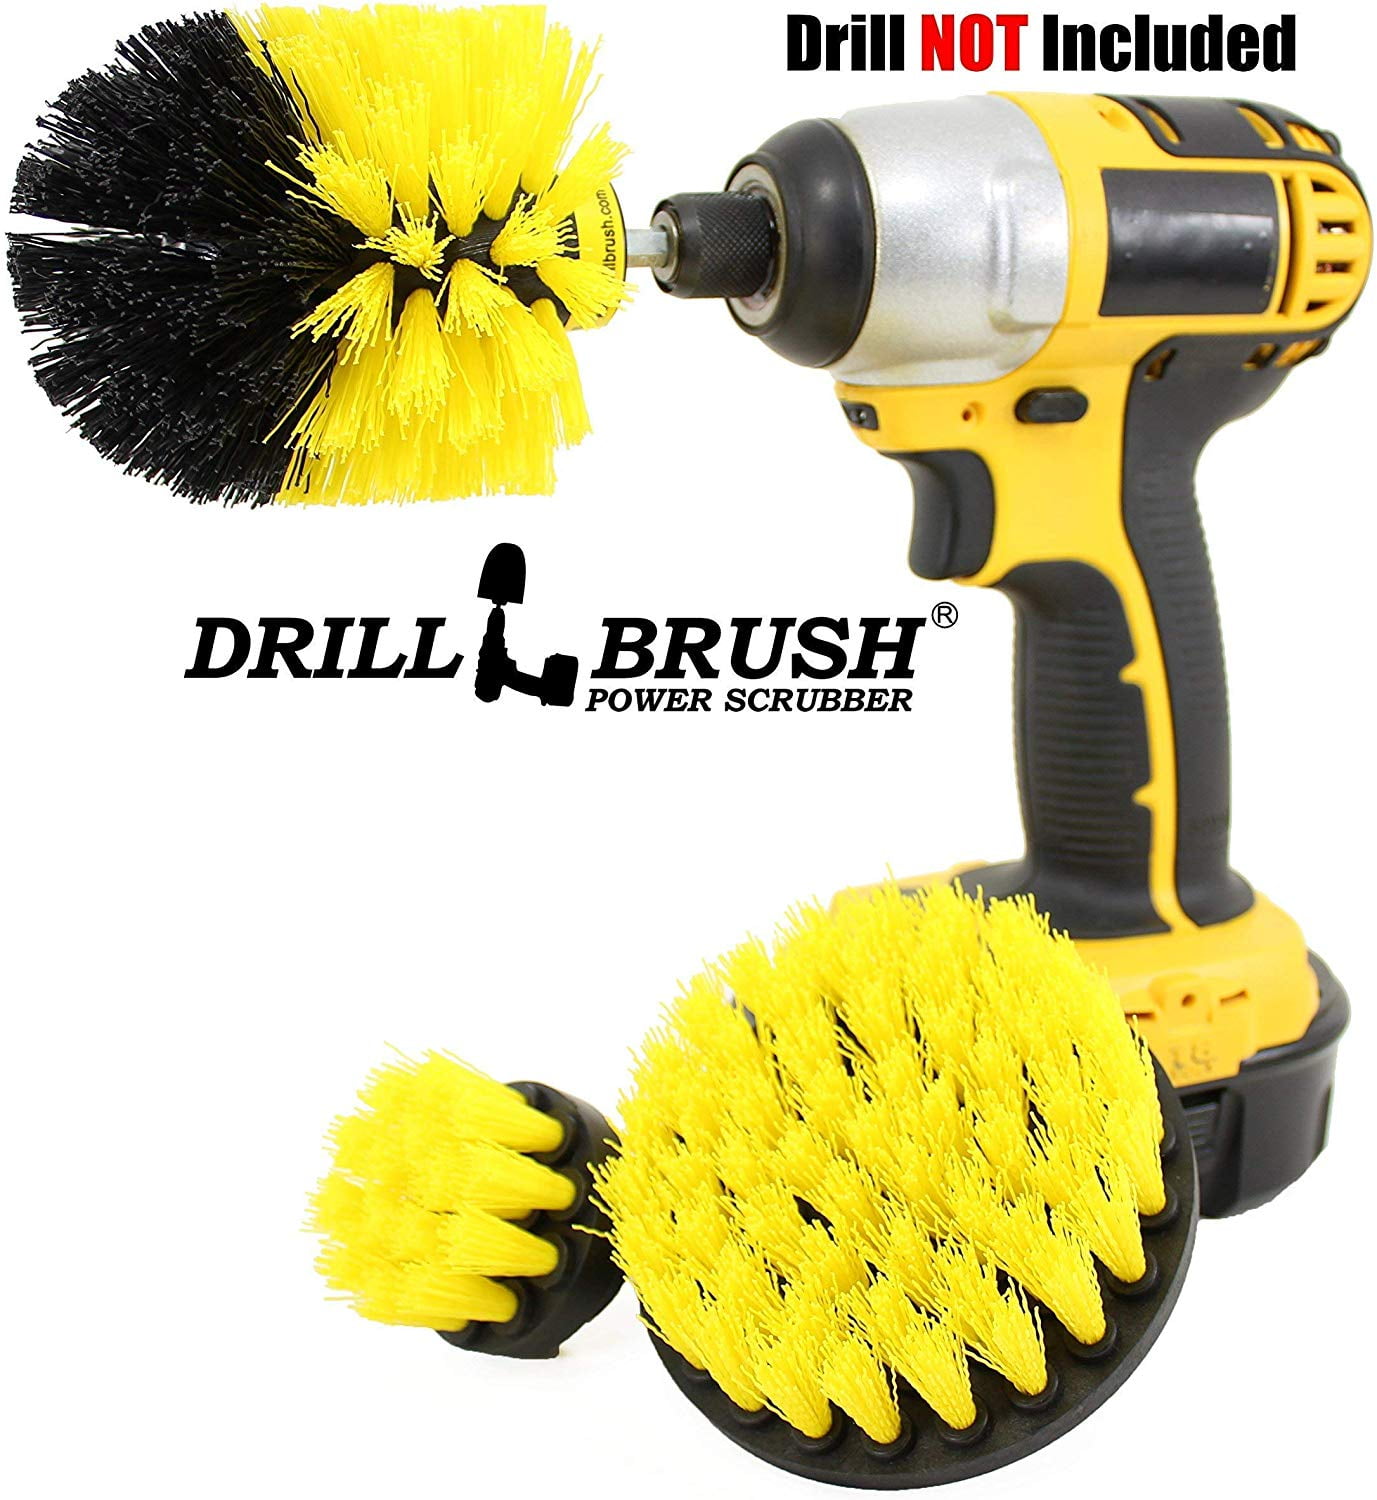 Power Scrubber Brush Drill Clean Bathroom Surface Tub Shower Tile Grout Cordless 